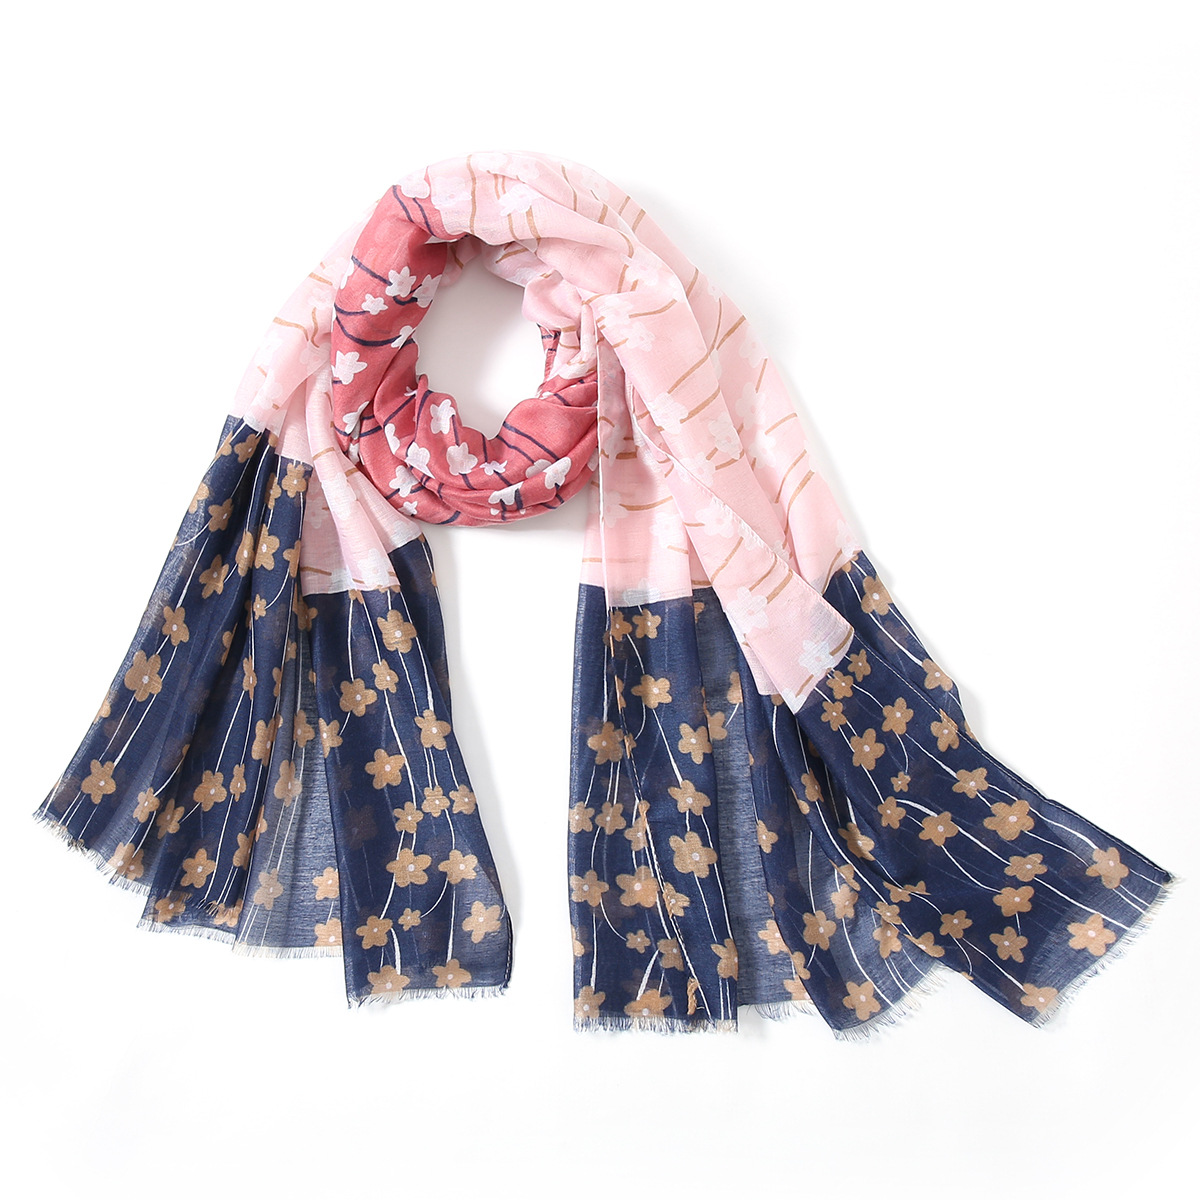 One-Piece Delivery New Export European and American Fashion Classic Printed Cotton and Linen Scarf Shawl Factory Wholesale